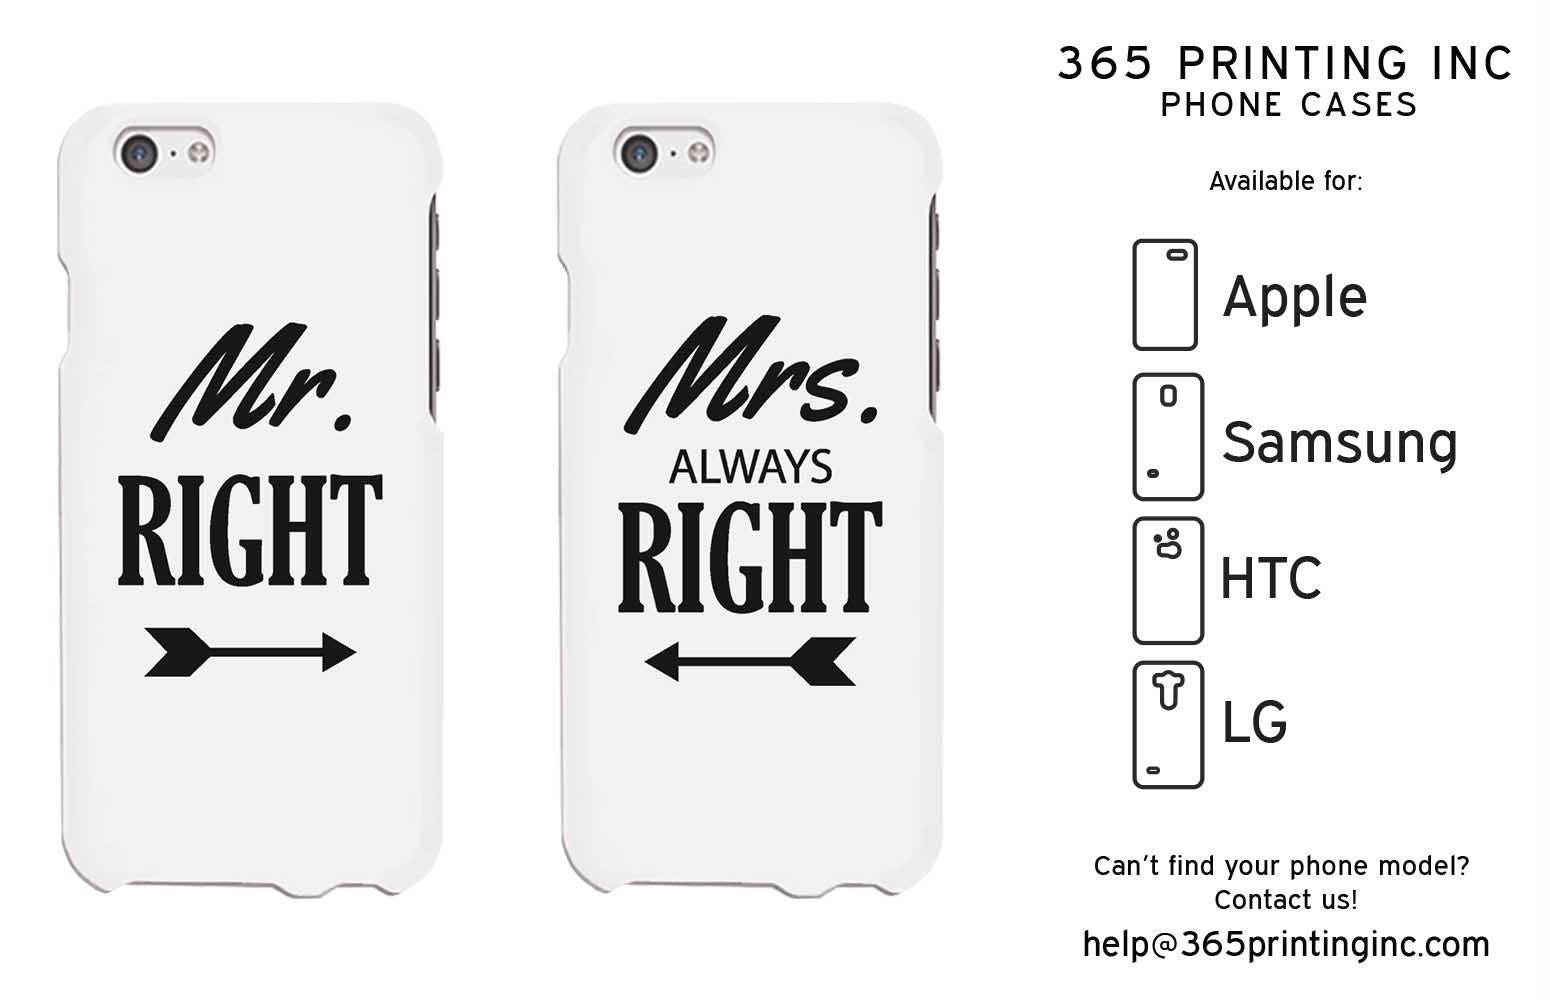 Mr Right And Mrs Always Right White Phone Case for iPhone, Galaxy S, One M8, G3